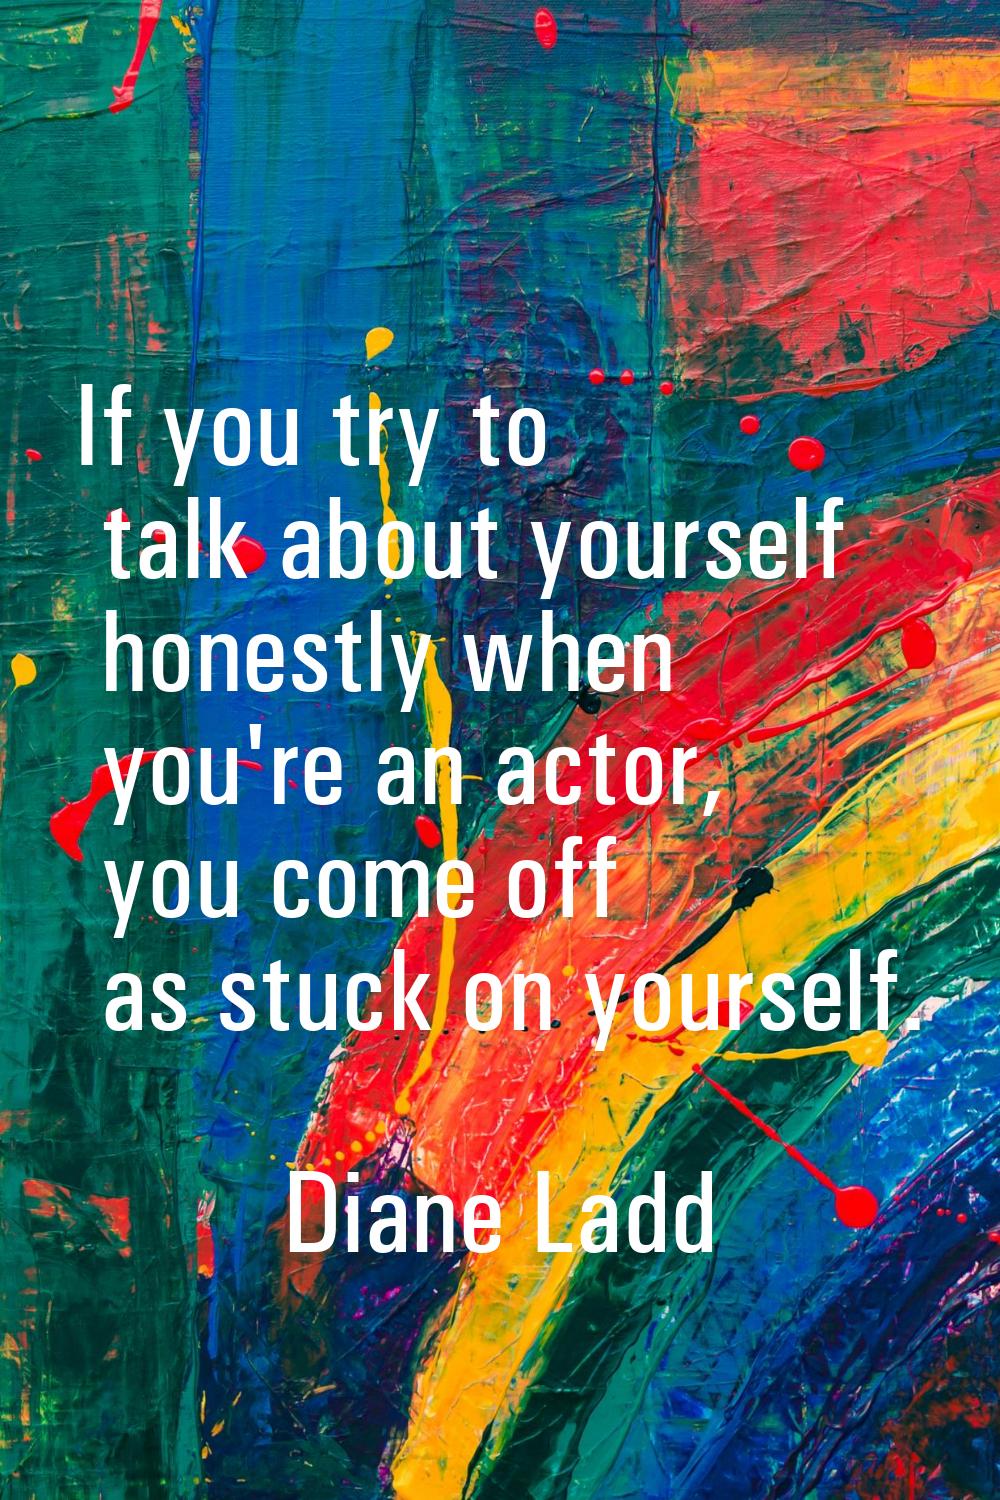 If you try to talk about yourself honestly when you're an actor, you come off as stuck on yourself.